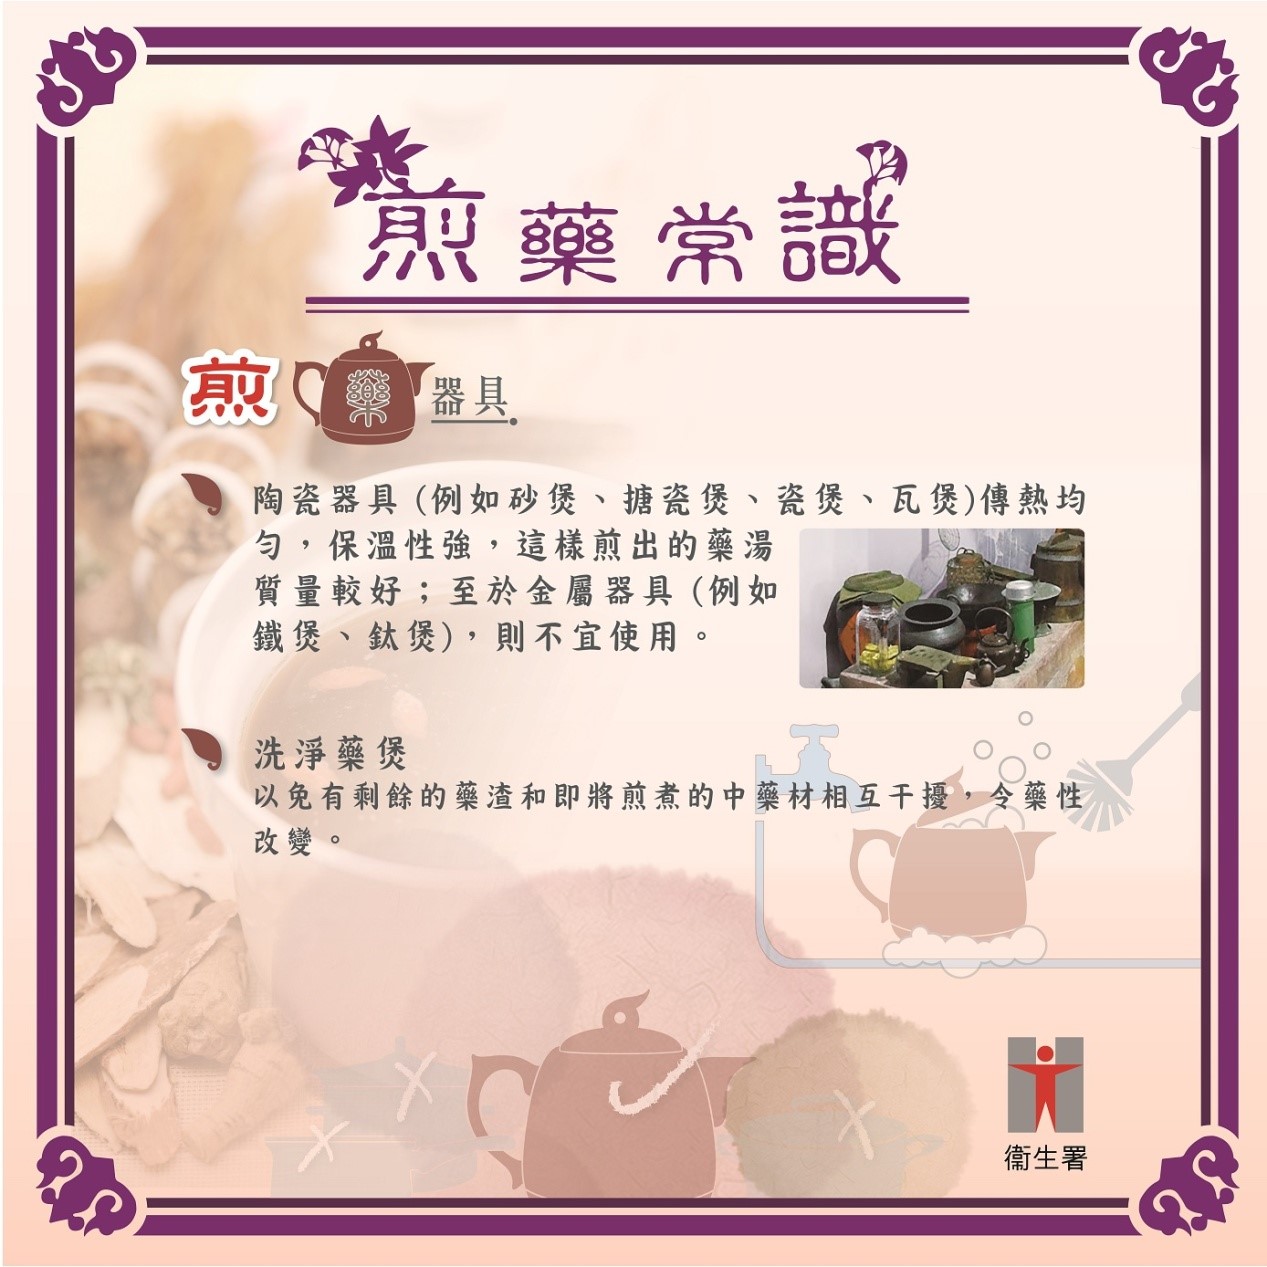 Preparing Herbal Decoctions (Chinese version only)